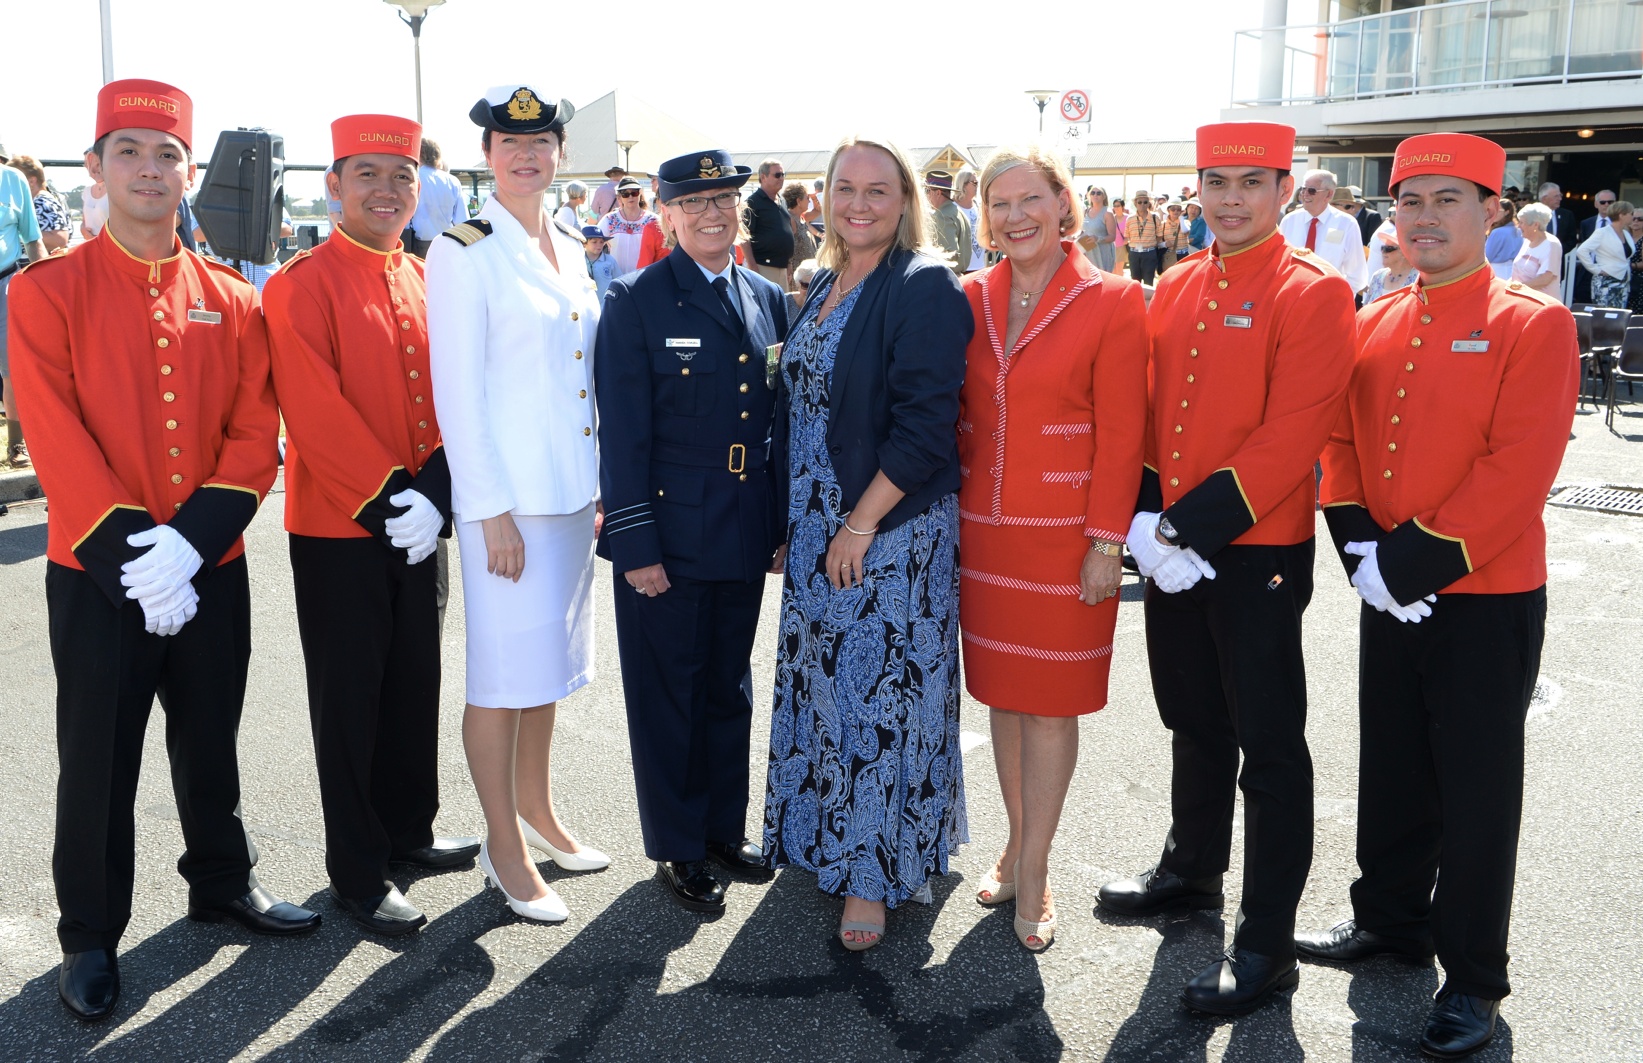 Newscastles Civic Welcome for Cunards Queen Elizabeth